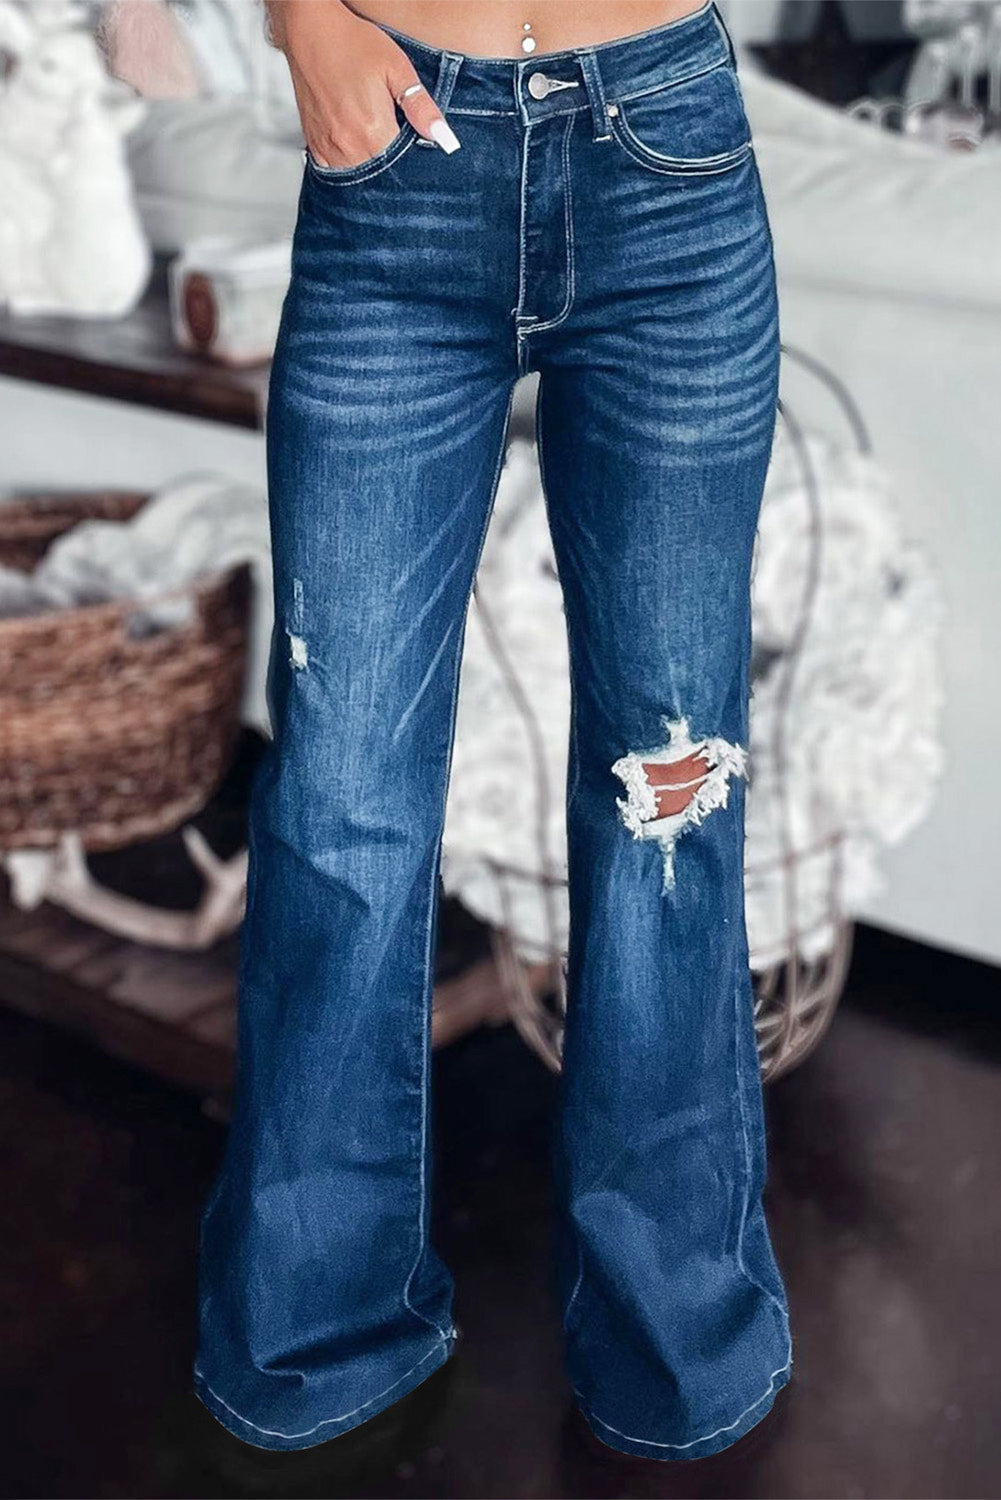 Ava Asymmetrical Open Knee Distressed Flare Jeans- only size 8 left! FINAL SALE!